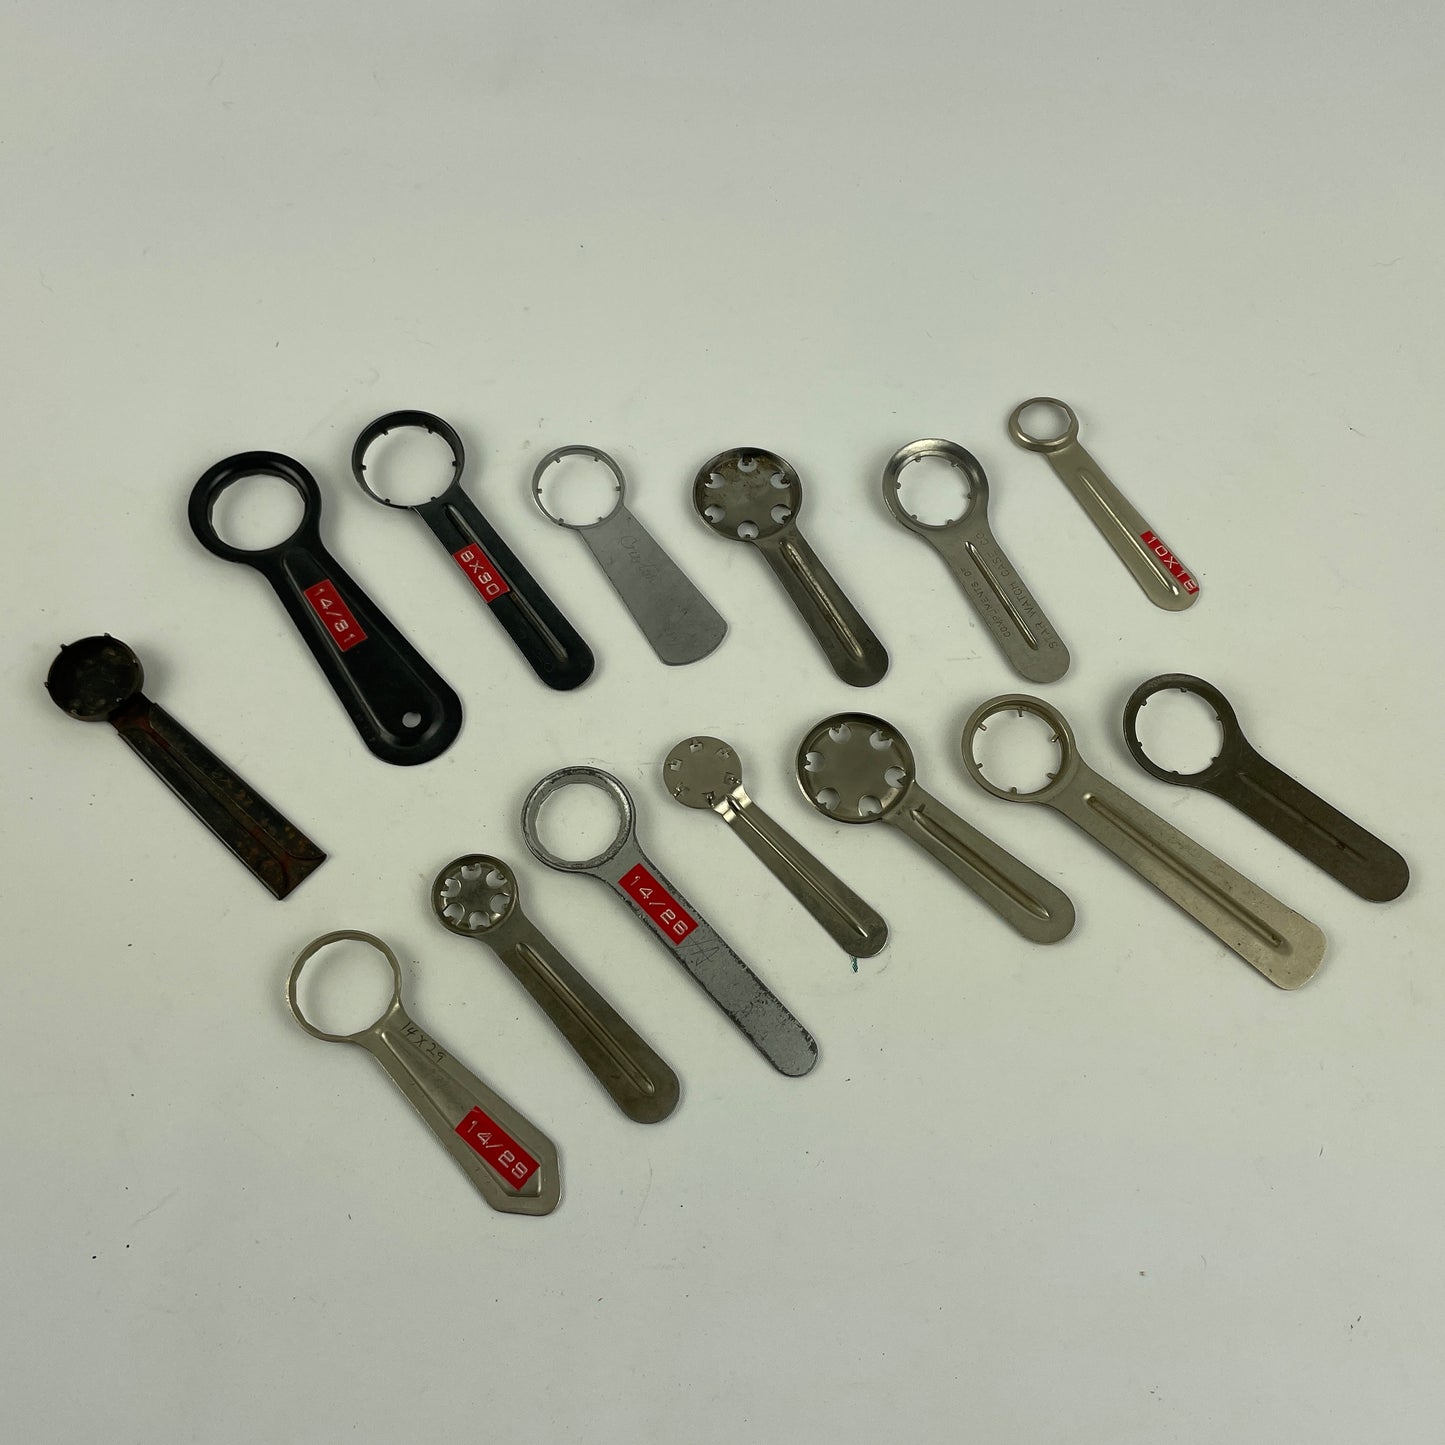 Feb Lot 55- Watchmaker’s Selection of Waterproof Round Wristwatch Case Wrenches